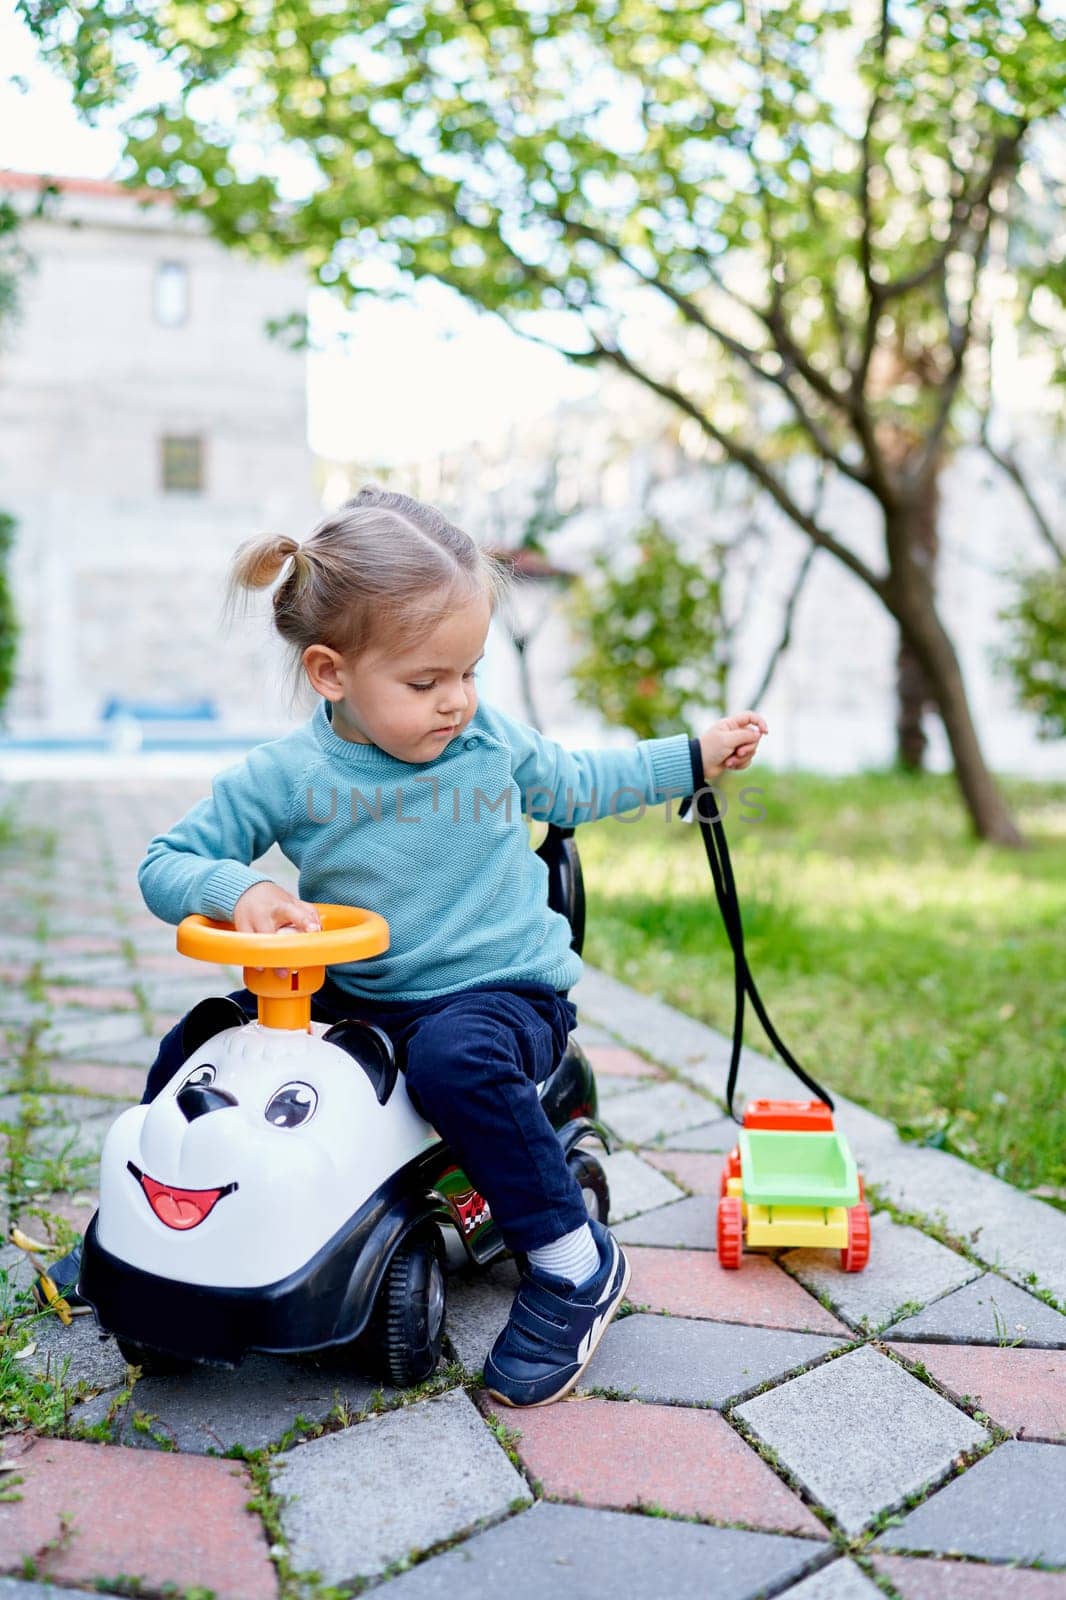 Little girl sitting on a toy car with a small toy car on a rope on a path in the garden. High quality photo